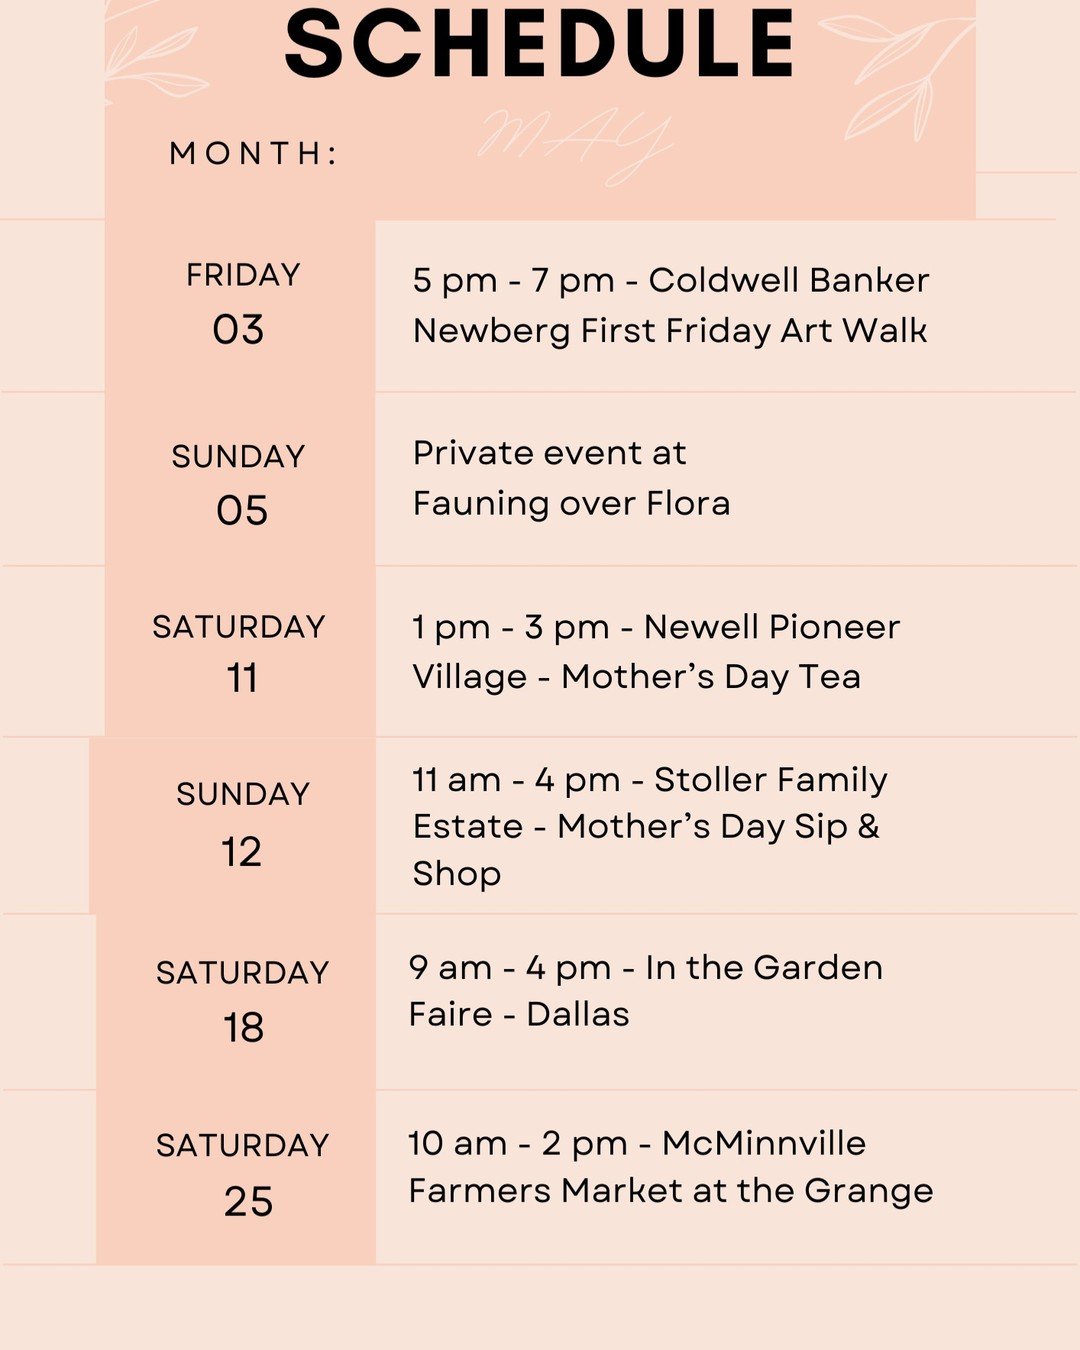 May is a busy month for us! Hope to see you at the events!

#mothersday #upcomingevents #willamettevalley #willamettevalleywine #newbergoregon #mcminnvilleoregon #shoplocal #shopsmall